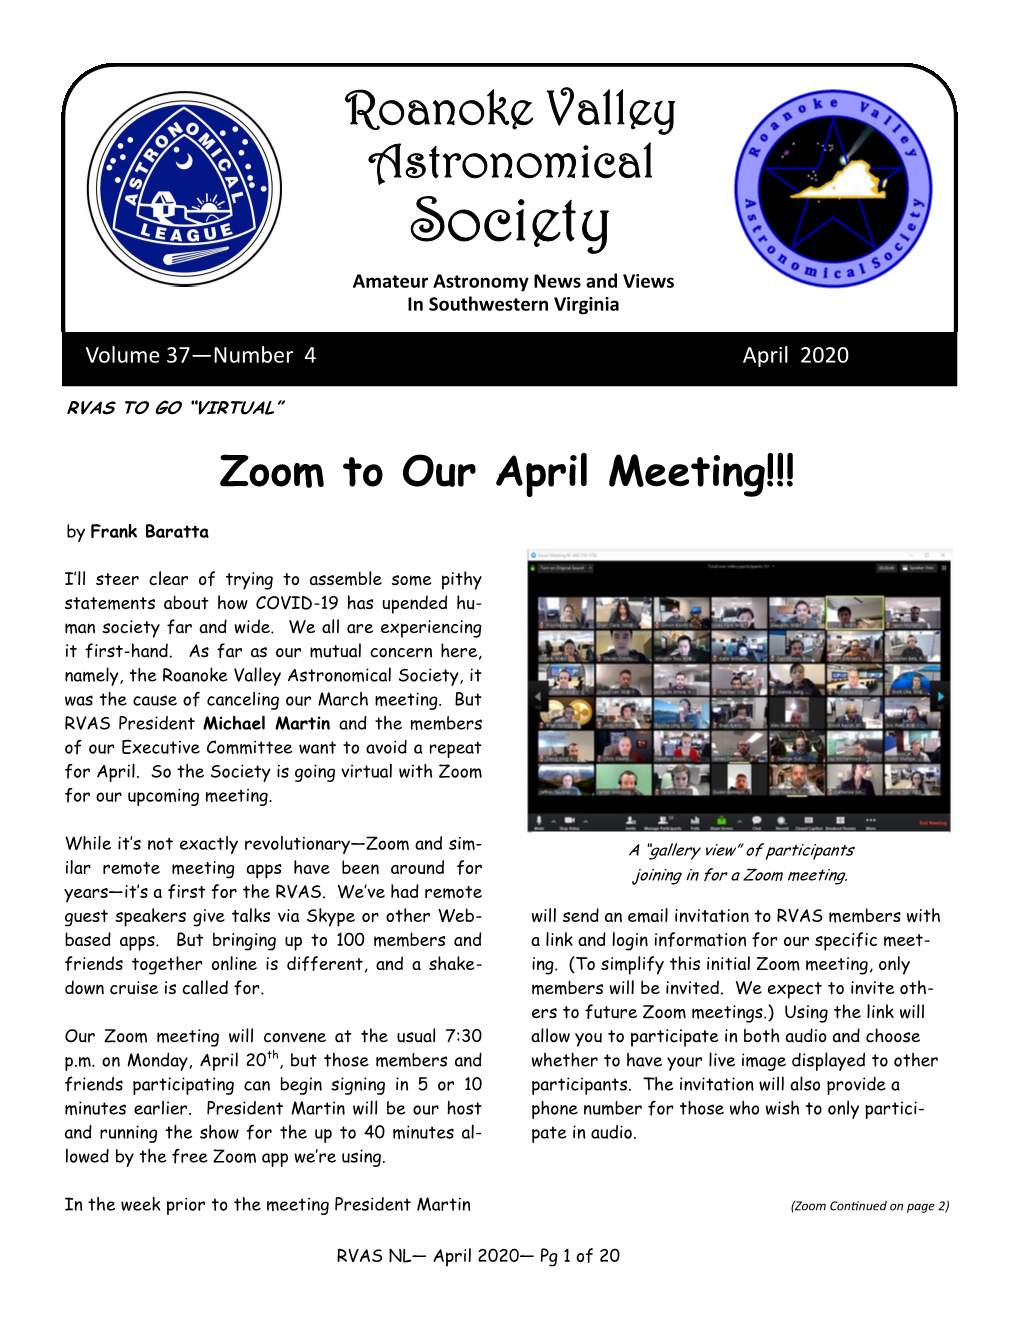 Society Amateur Astronomy News and Views in Southwestern Virginia